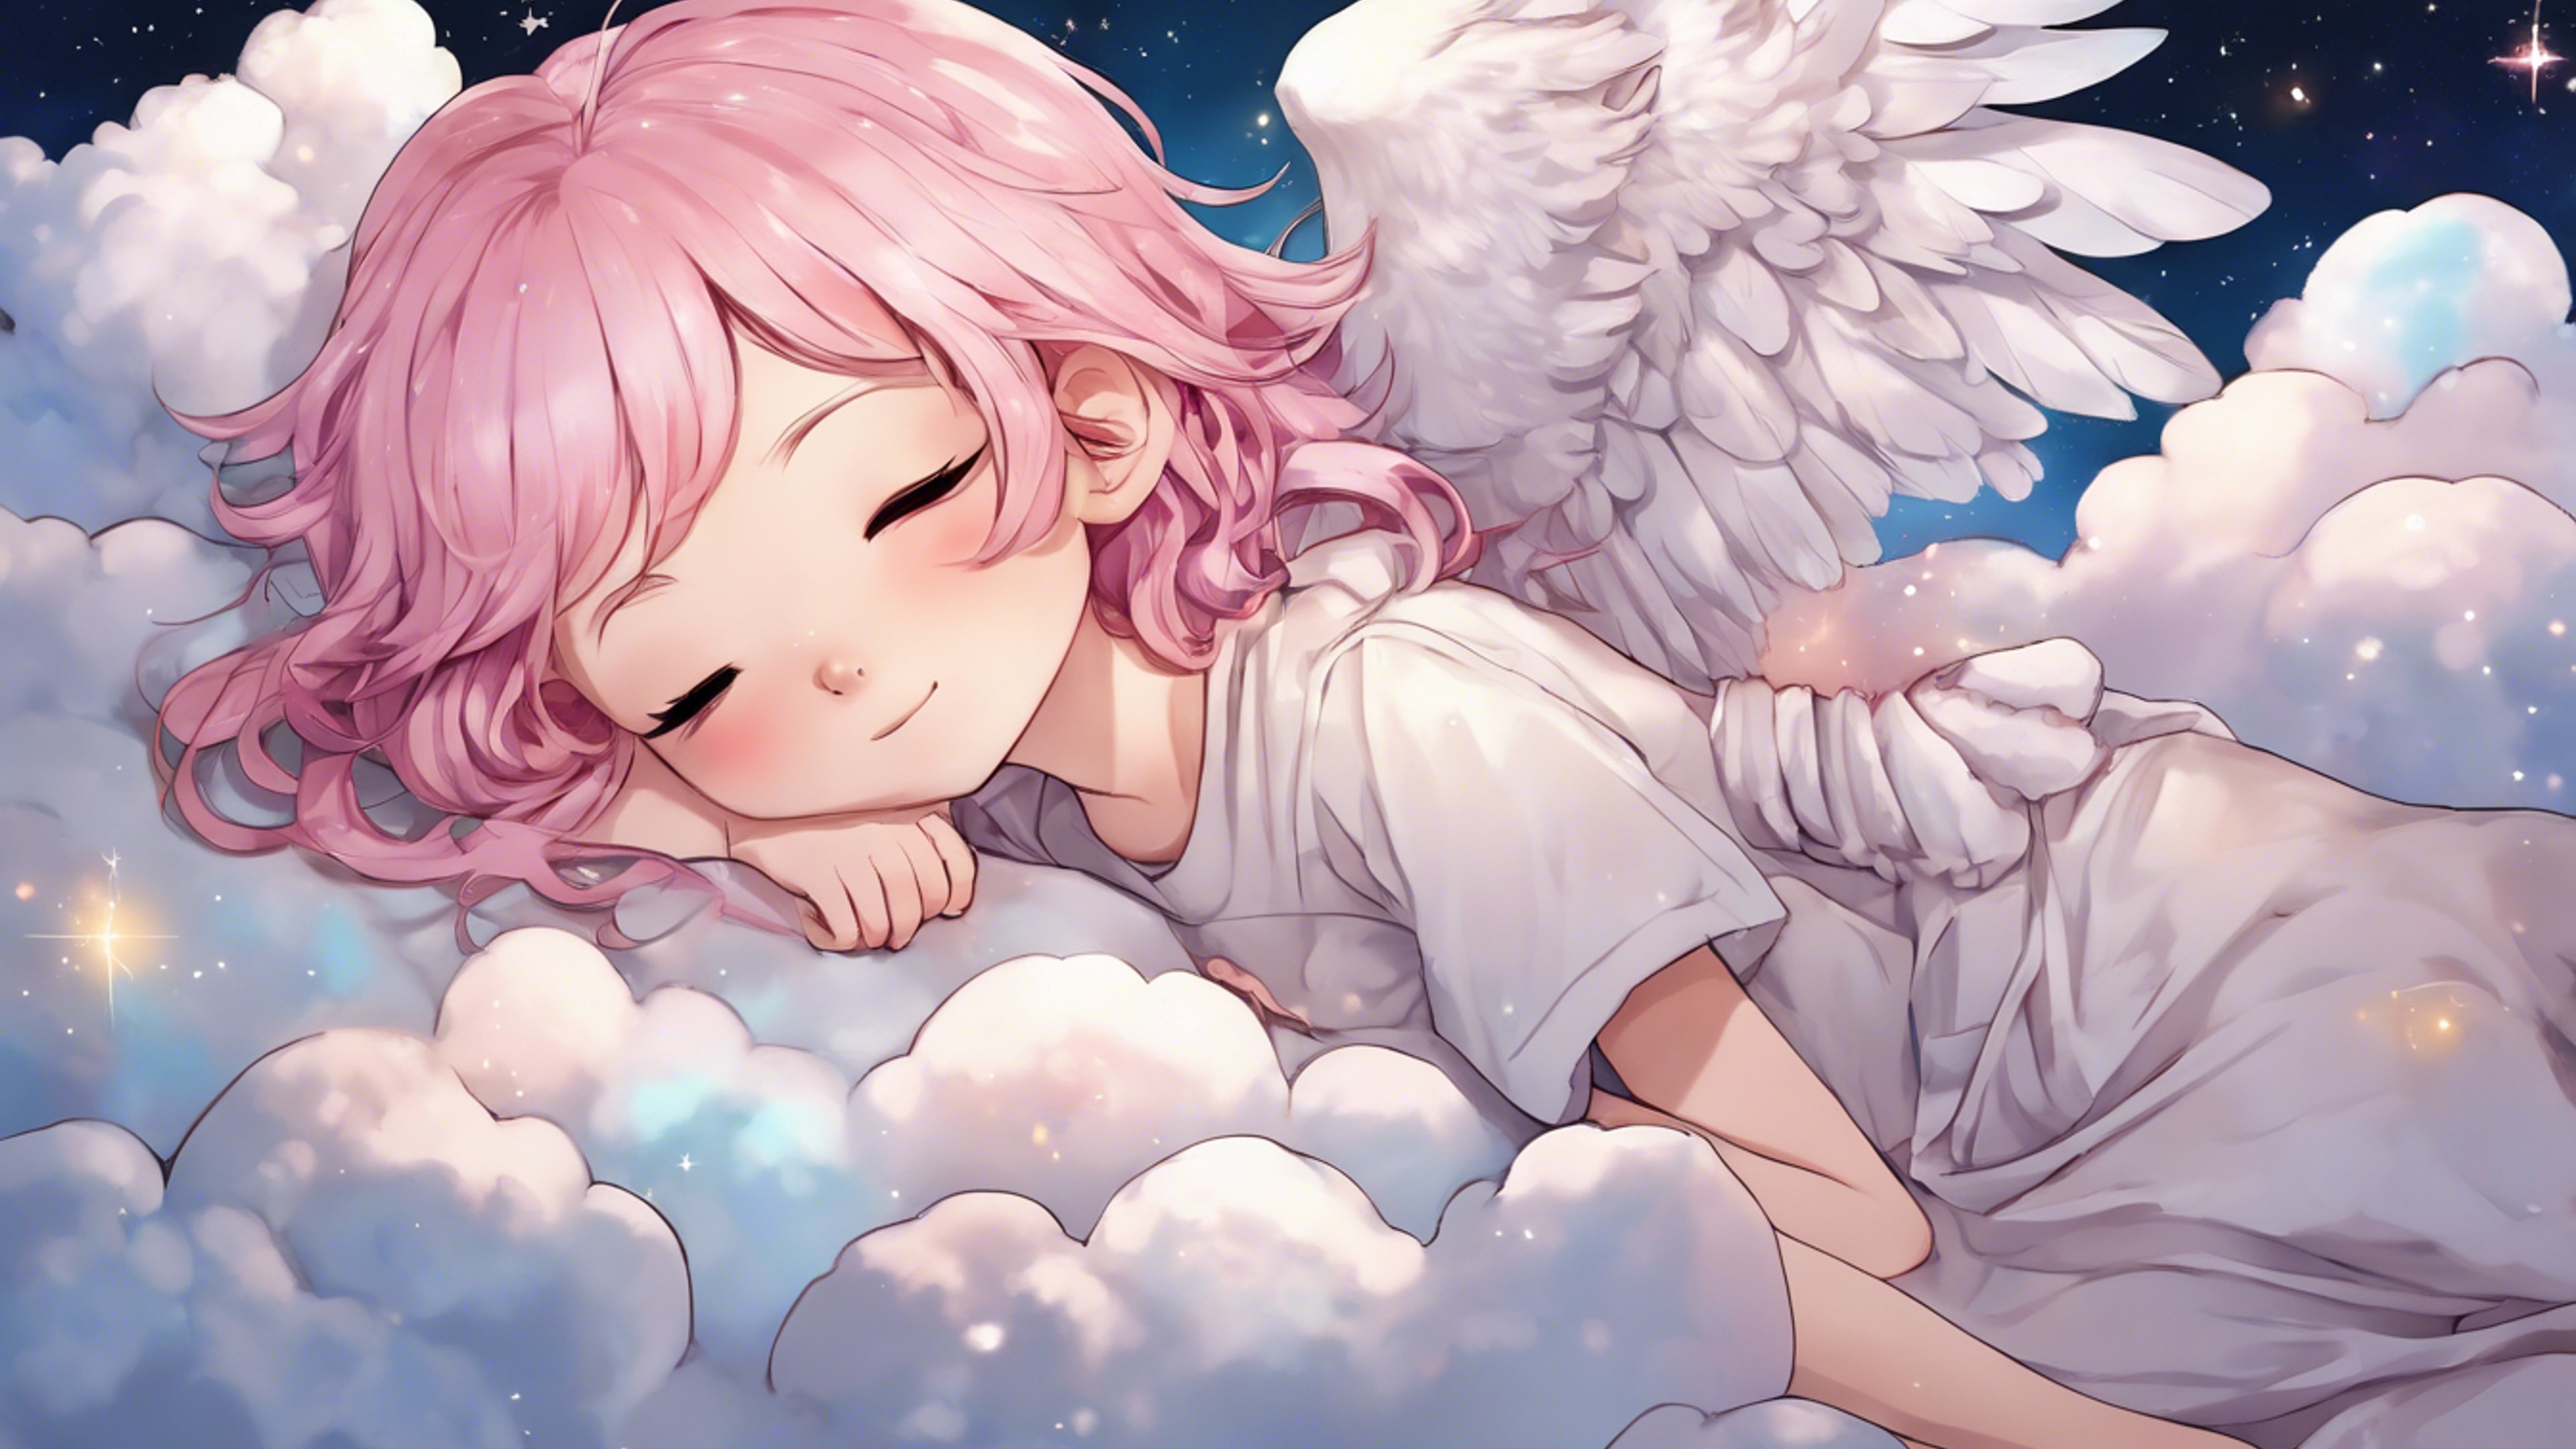 A chibi-style anime girl with pastel pink hair and angel wings, sleeping peacefully on a fluffy cloud under a starry night sky. Hintergrund[4a6f35b80bd74bd2872d]